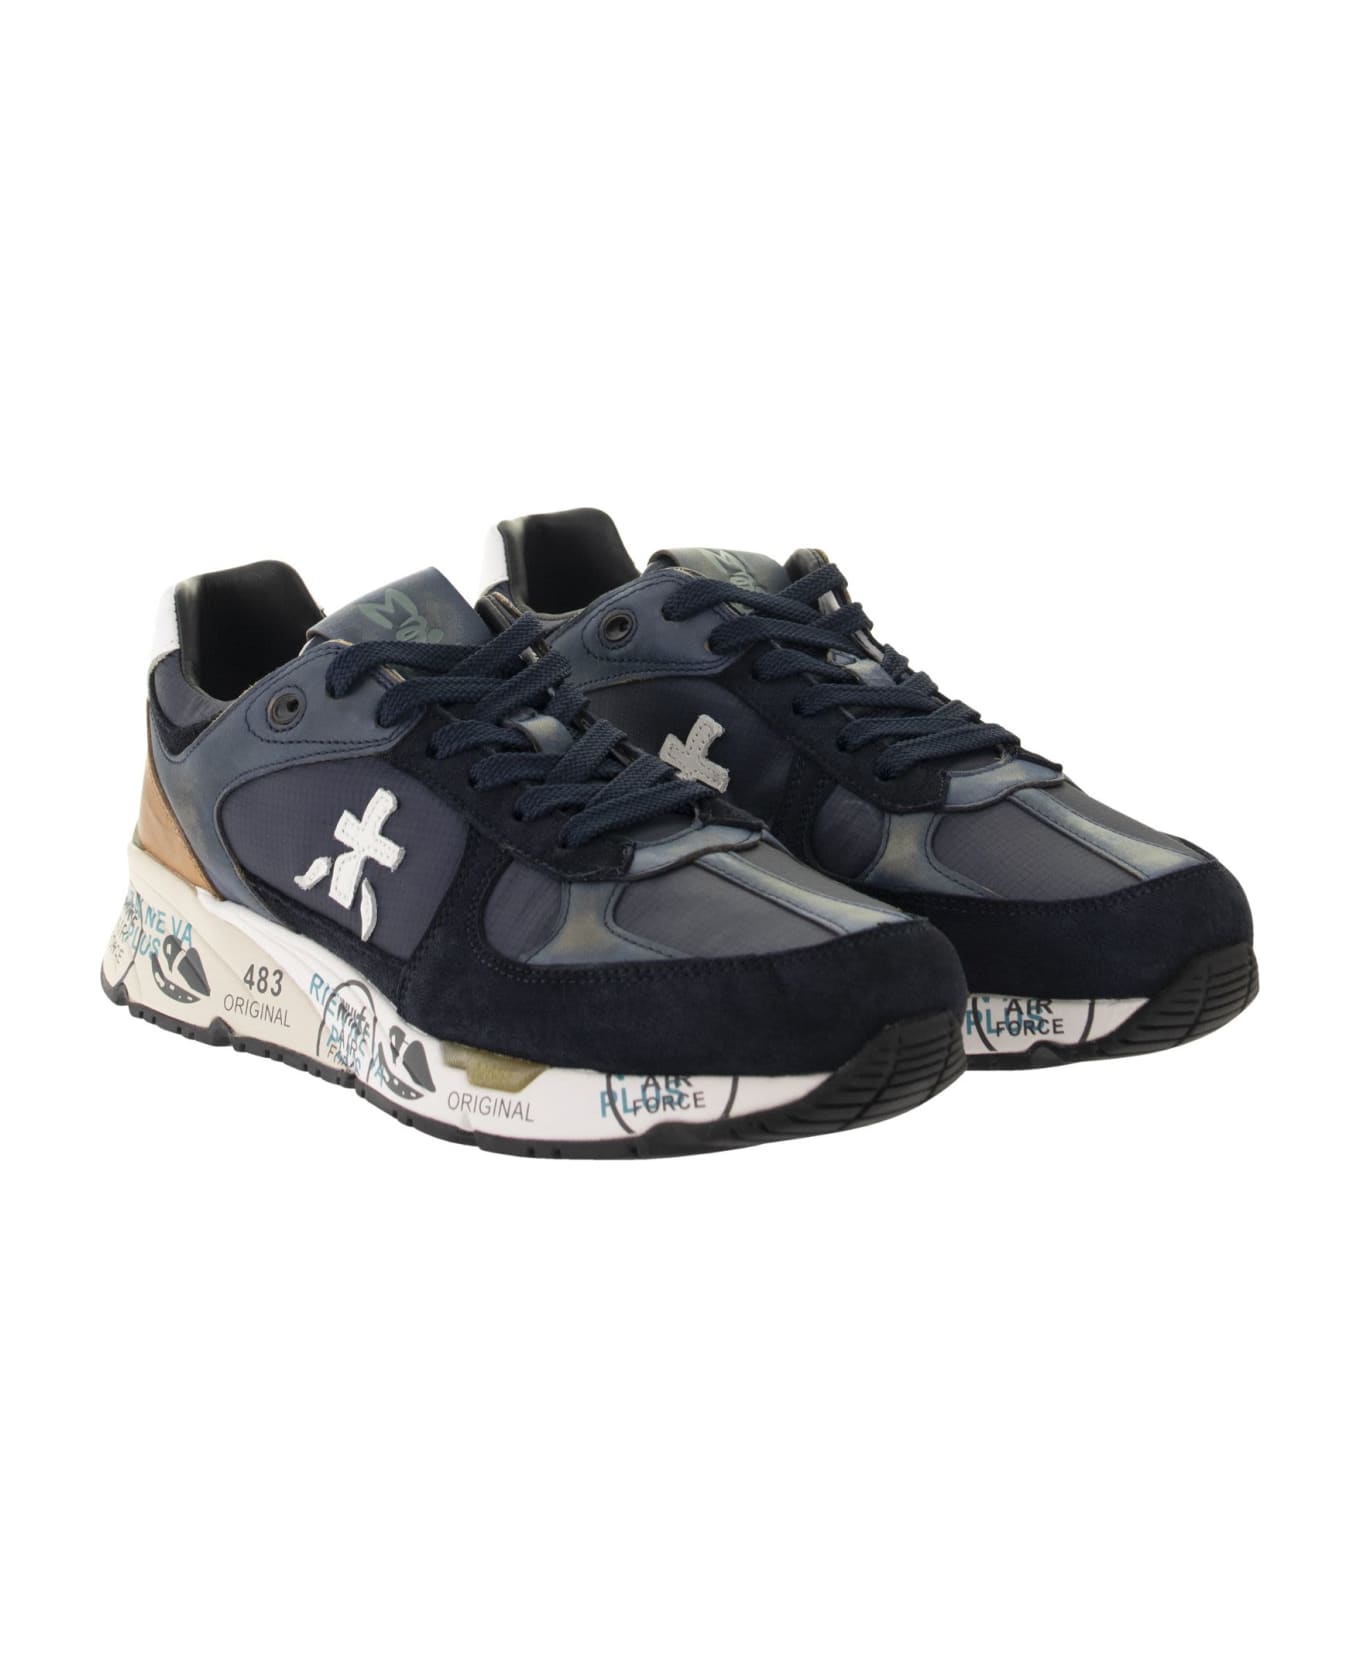 Premiata Mase Patched Low-top Sneakers - Blue